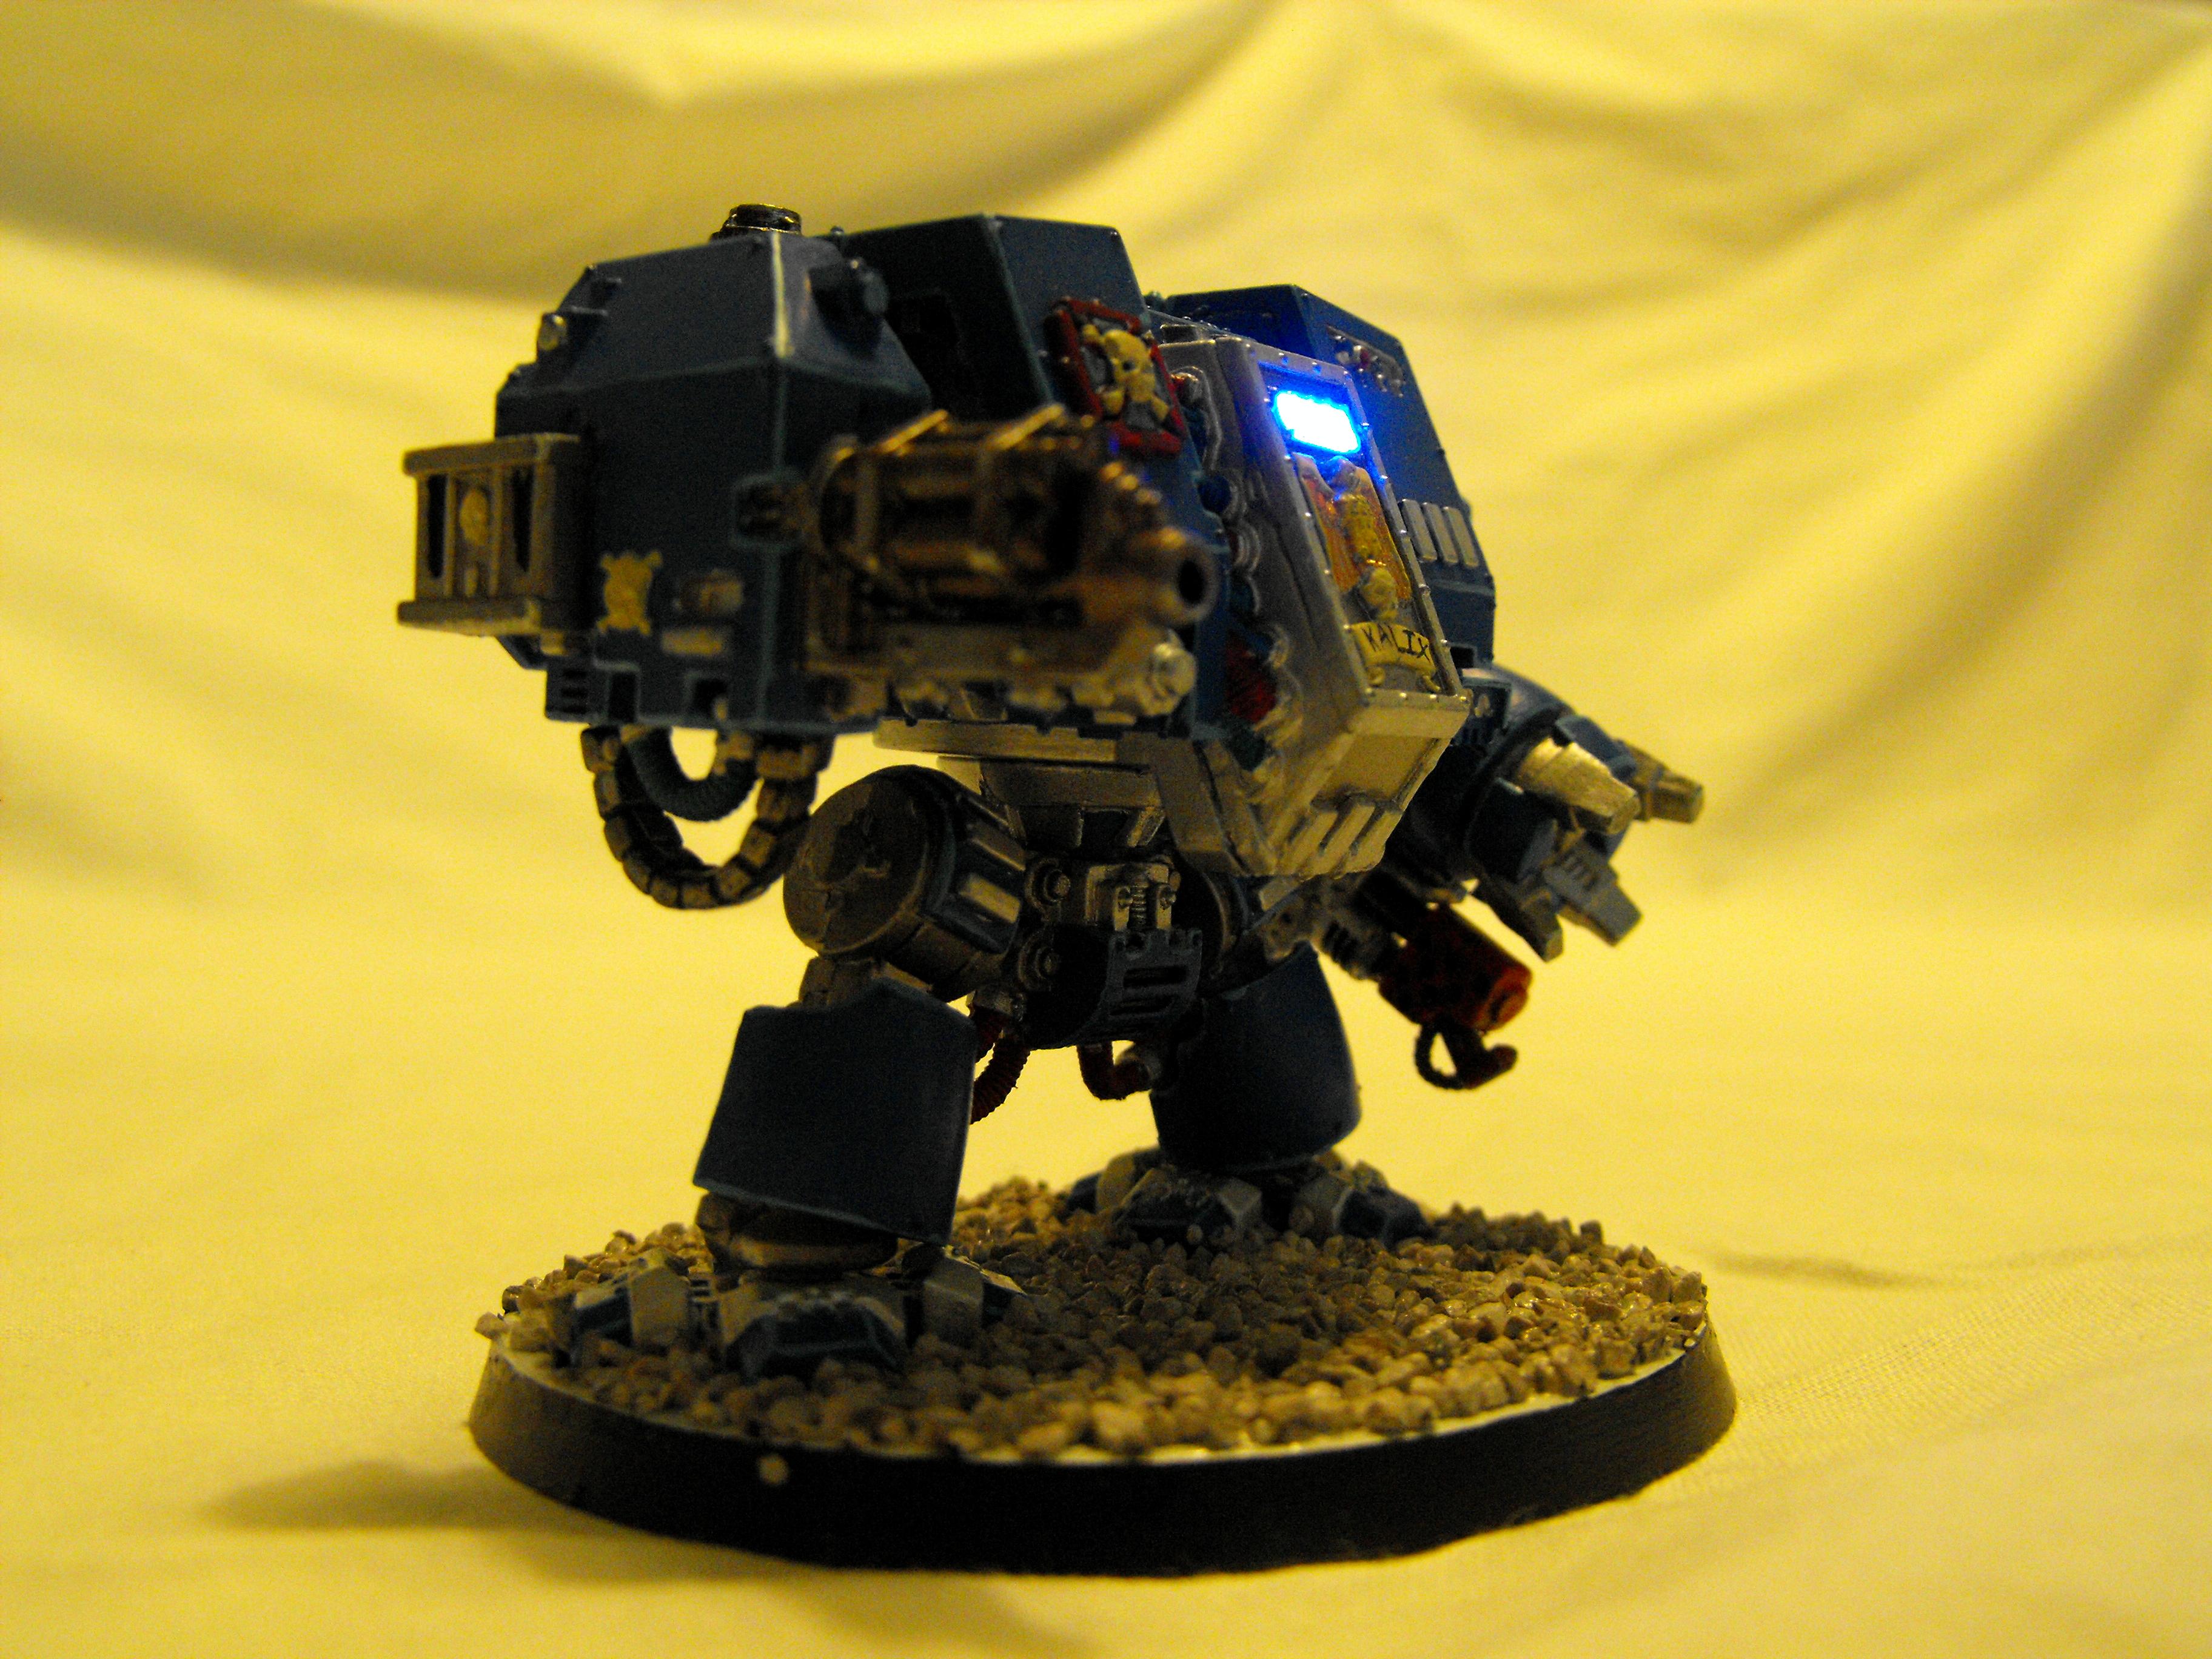 Dreadnought, LED, Space Marines, Warhammer 40,000